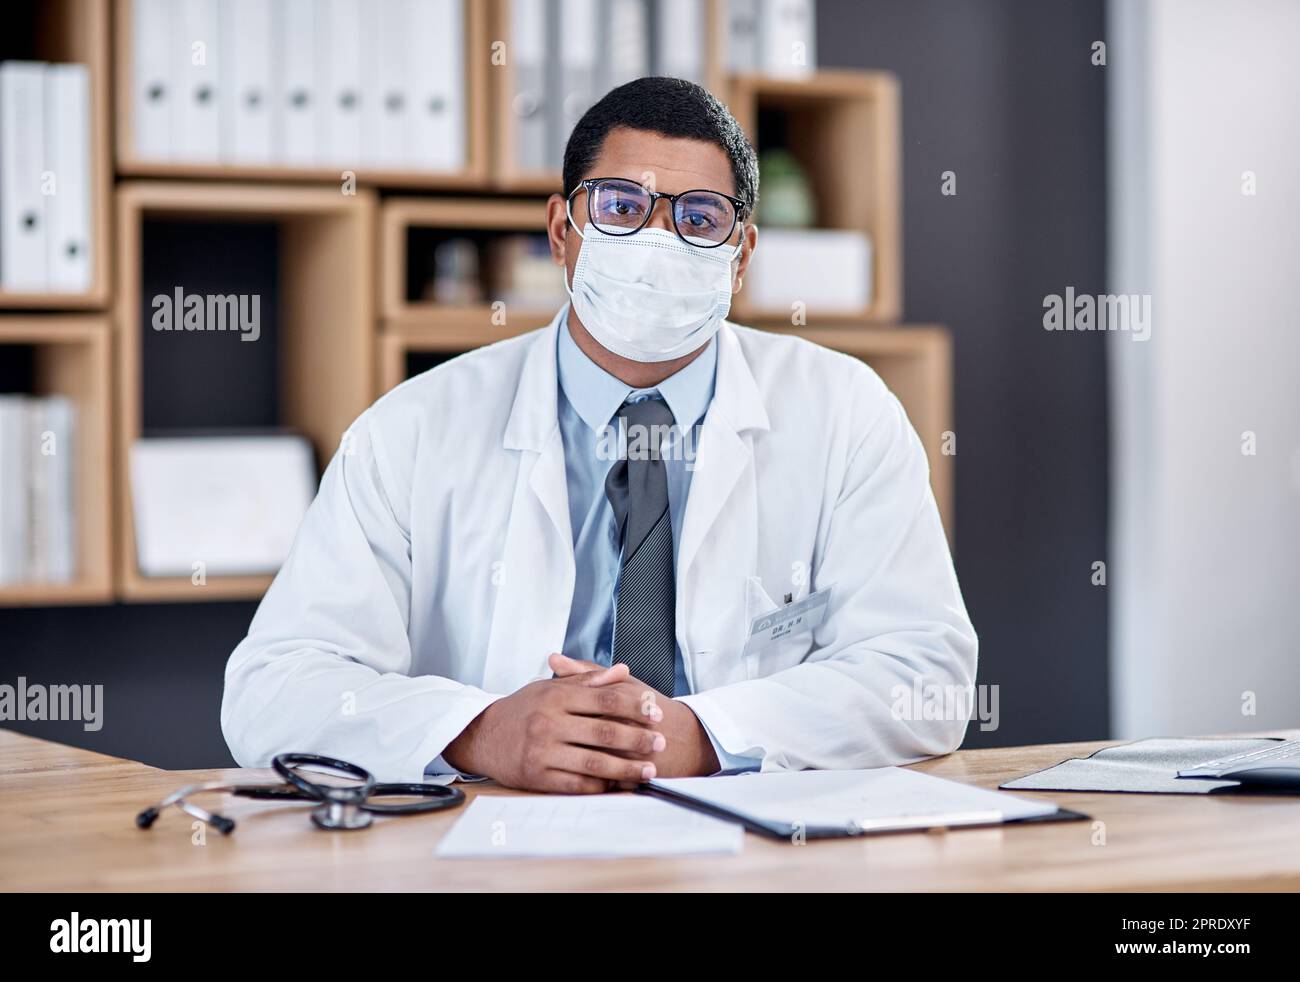 Doctor wearing covid mask in clinic to prevent spread of pandemic virus, disease or illness in hospital consult. Portrait of medical professional, healthcare oe frontline worker ready to treat people Stock Photo